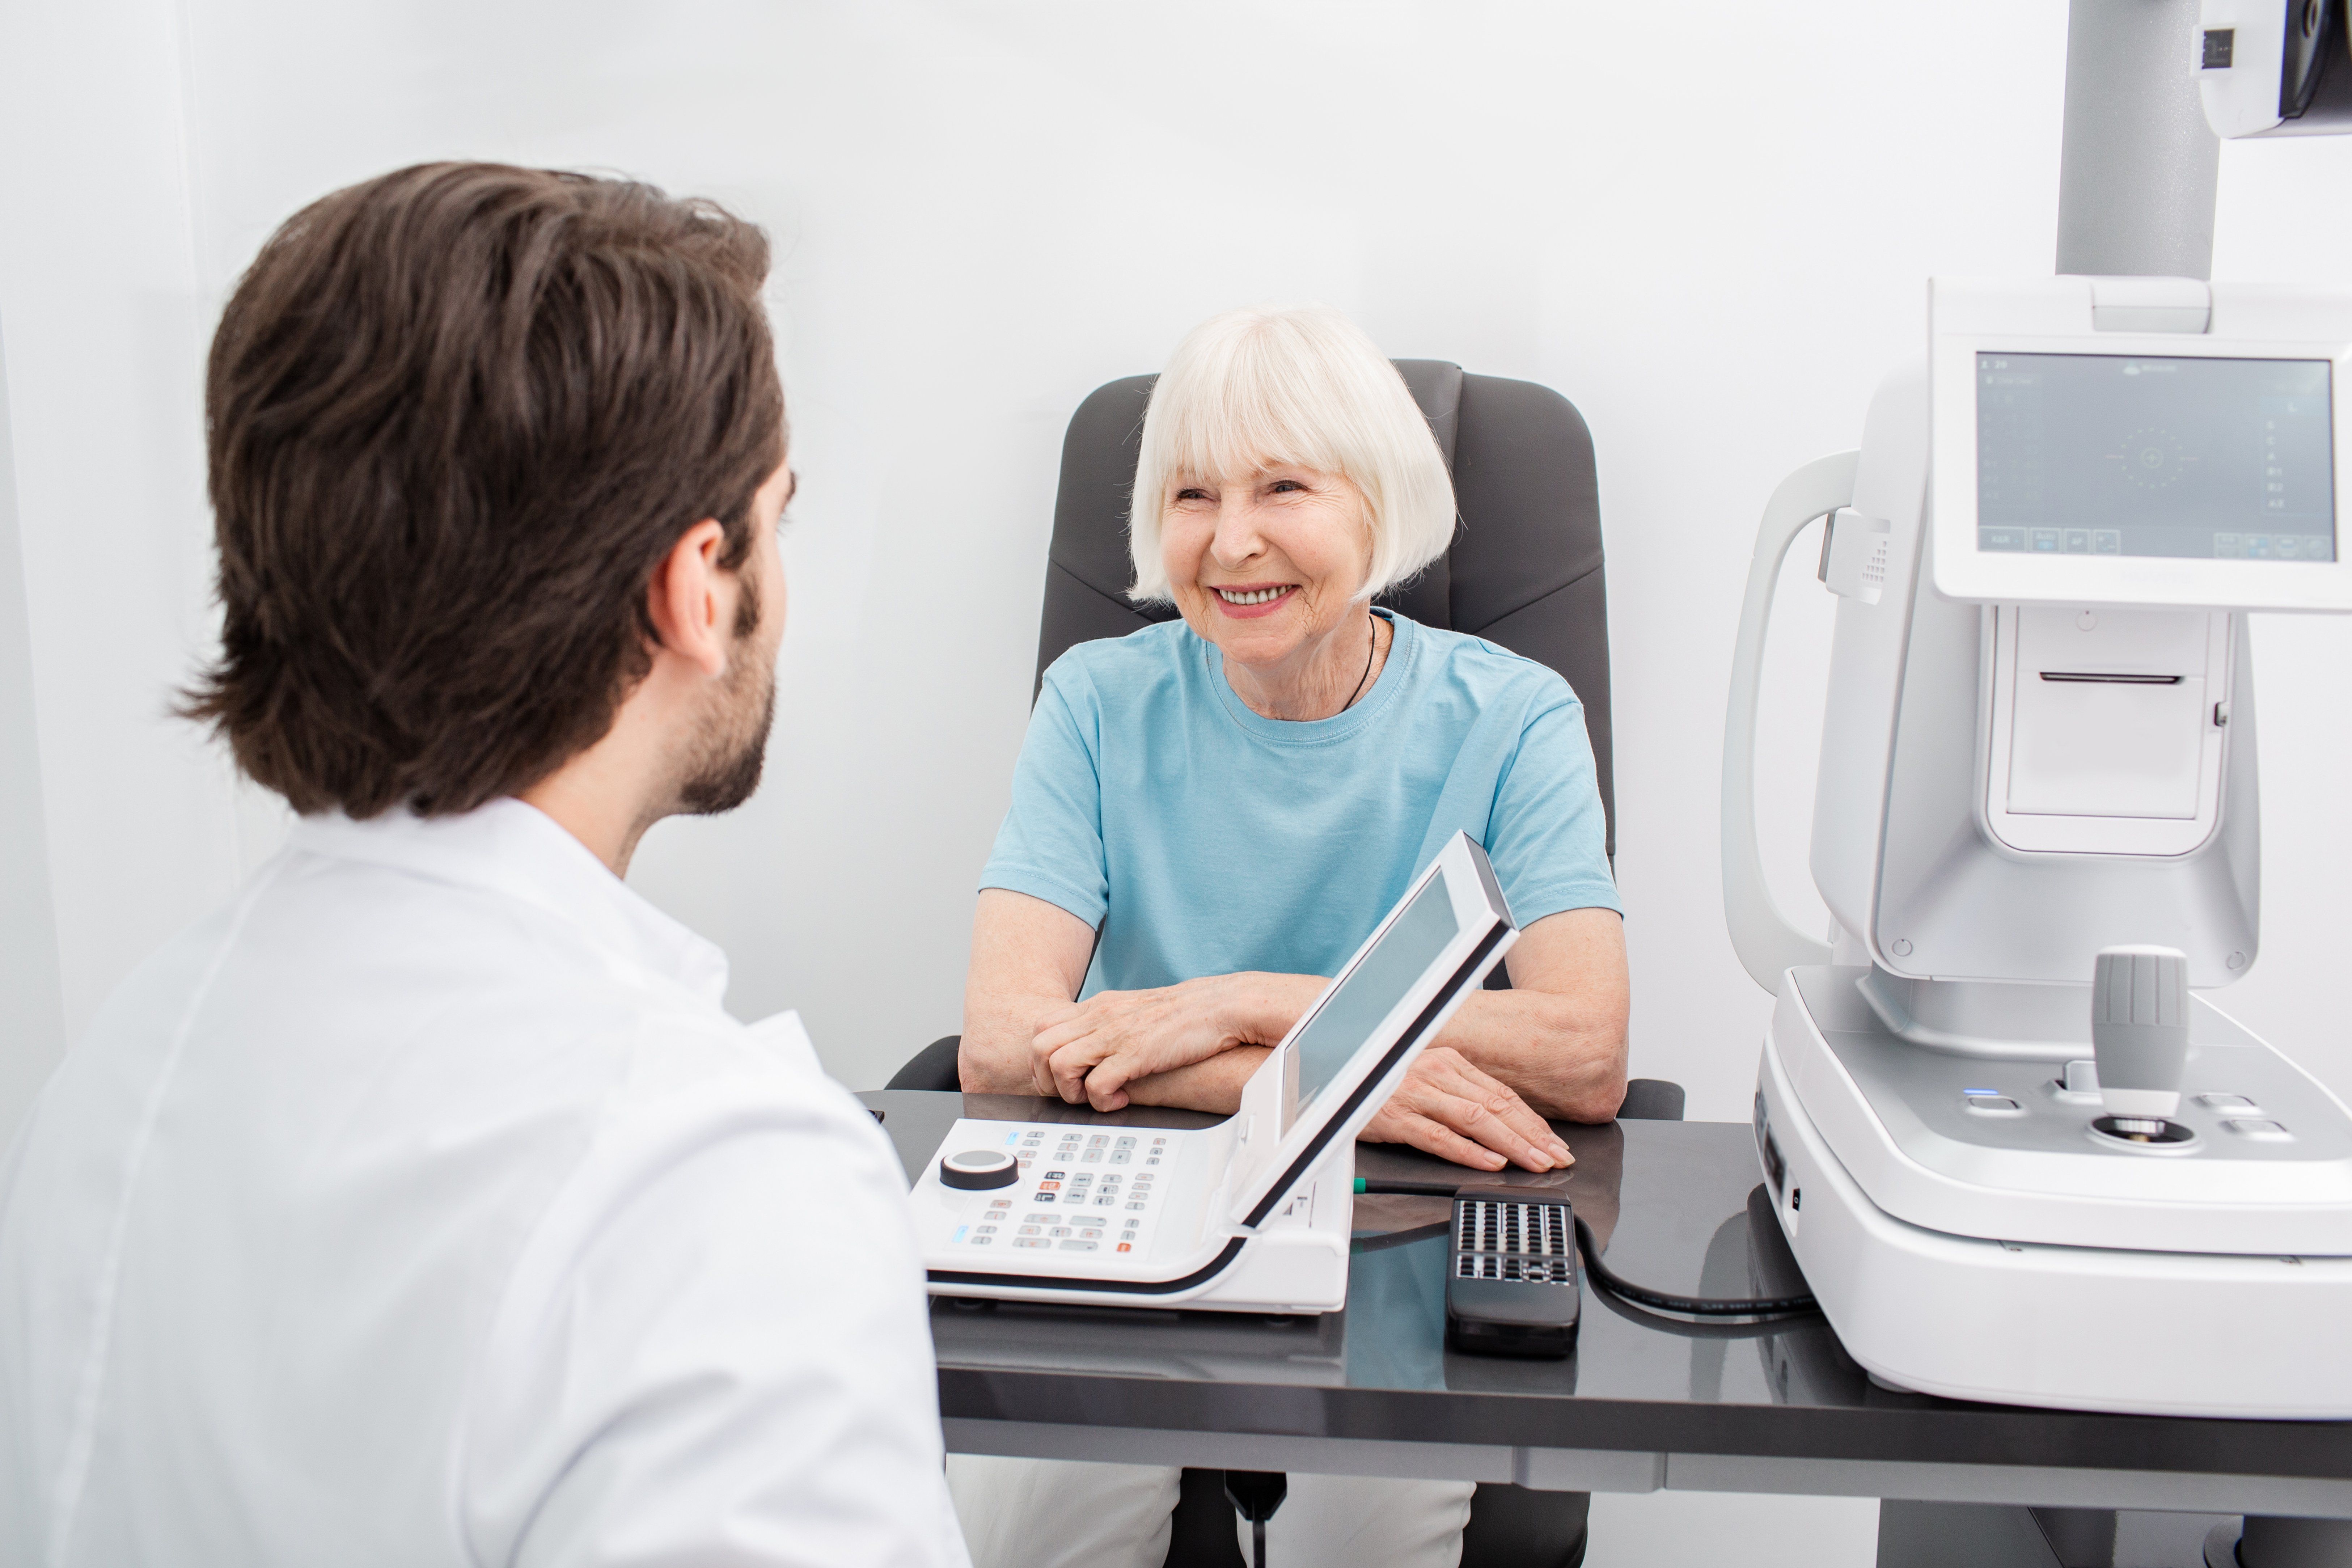 How Is Glaucoma Screening Done?